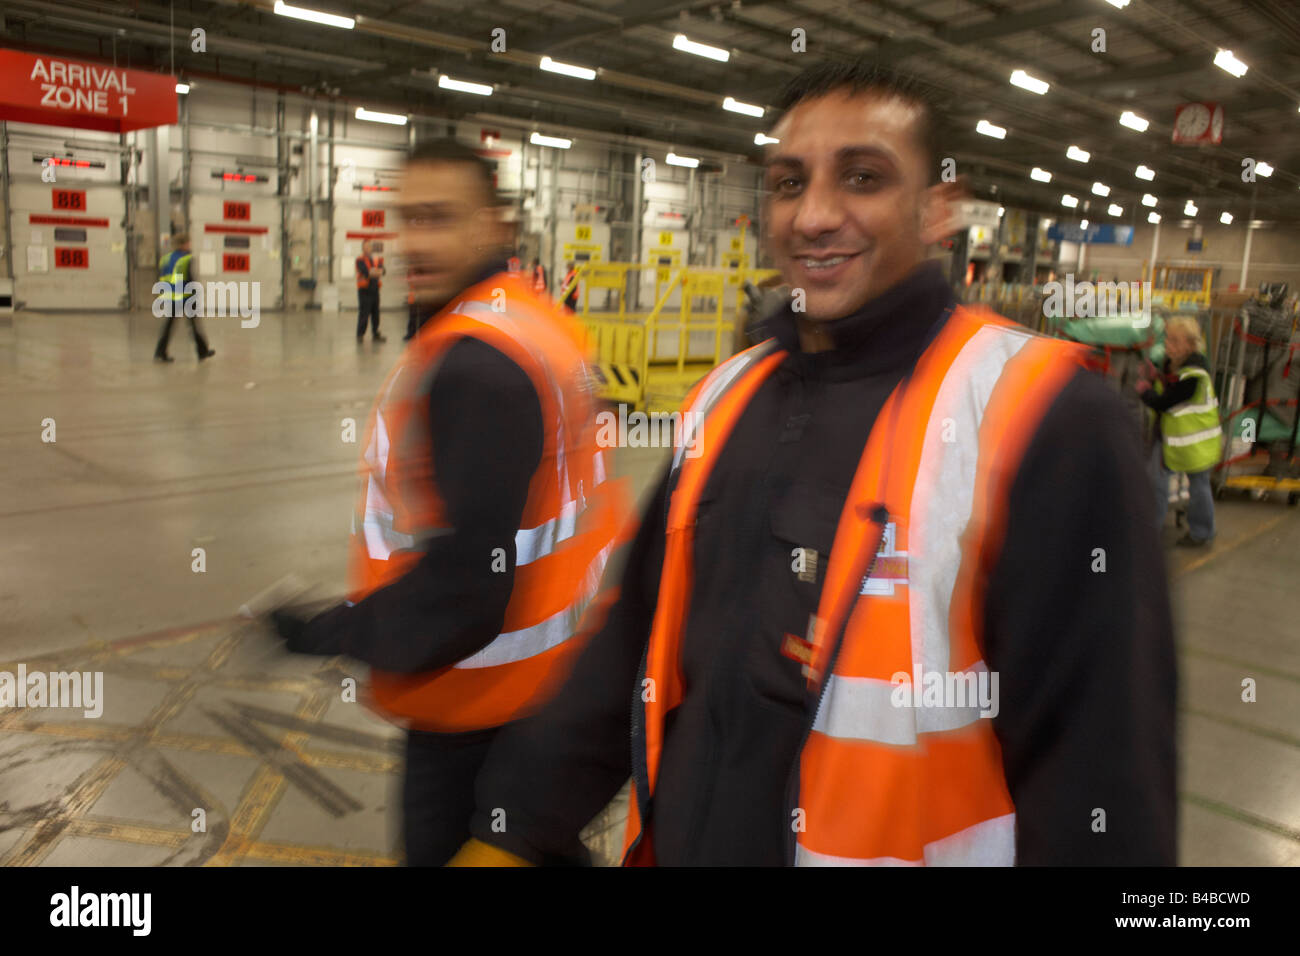 Postal workers enjoy humour at the Royal Mail's DIRFT logistics park in Daventry, Northamptonshire England Stock Photo